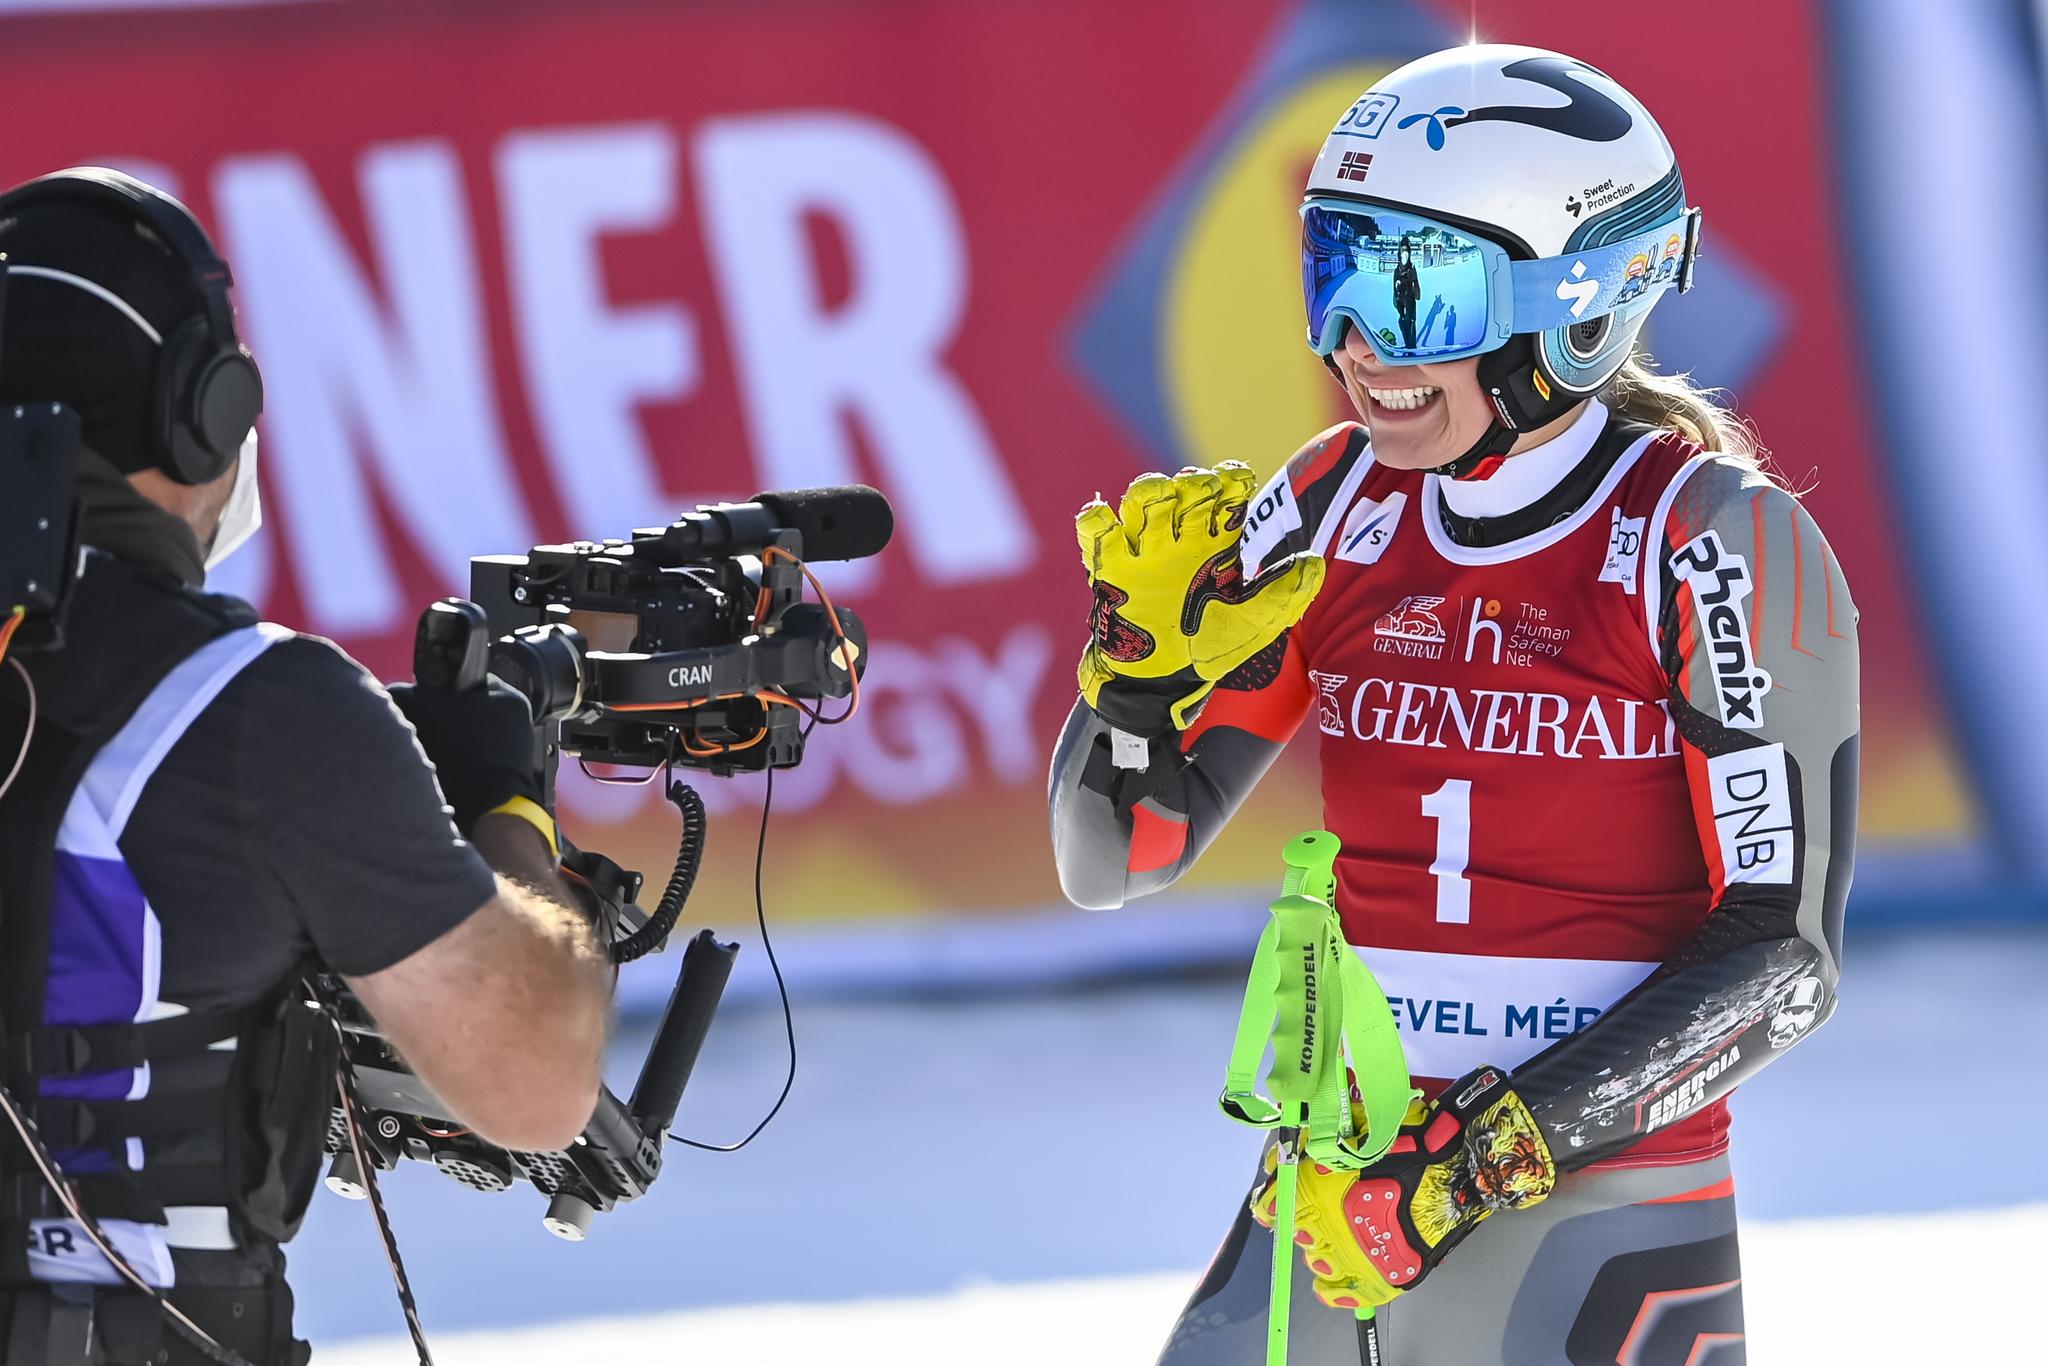 Follow the 2022/23 Women’s Alpine Skiing World Cup live